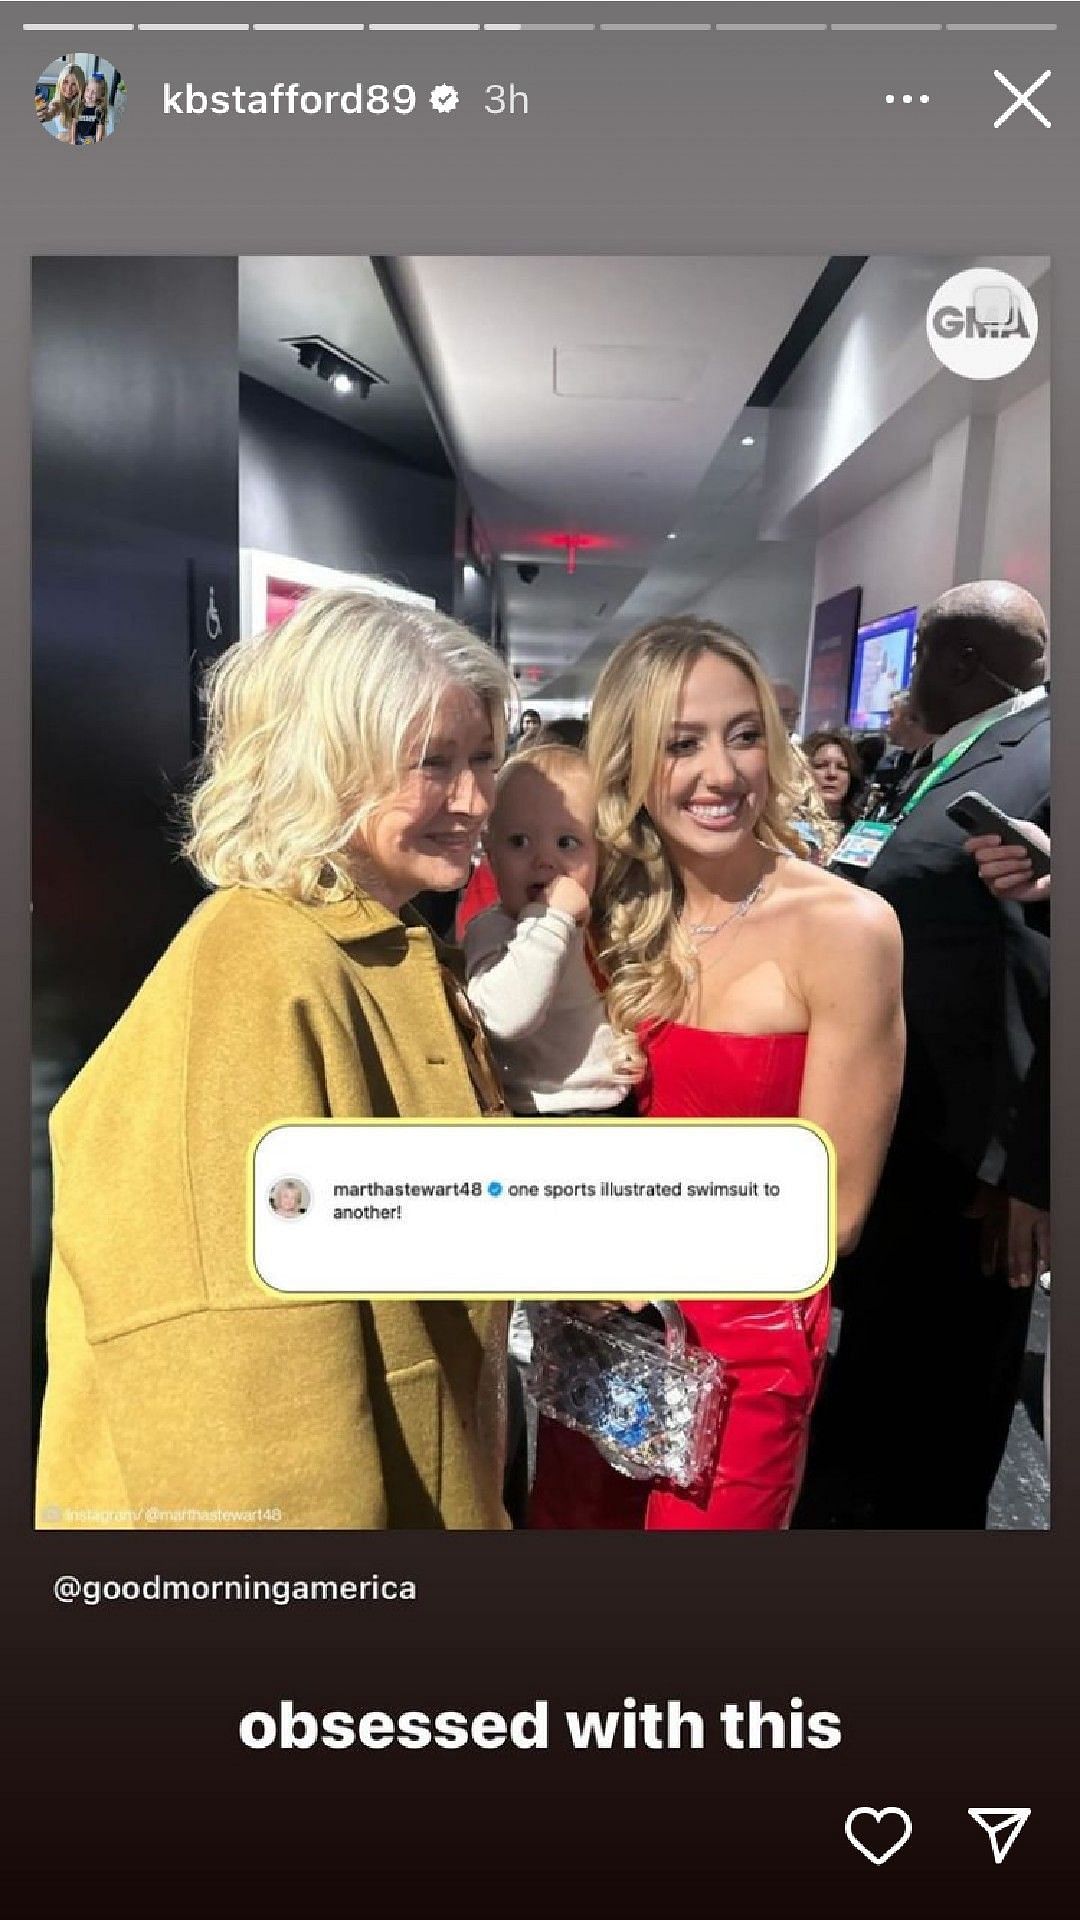 Kelly Stafford shared the meeting between Martha Stewart and Brittany Mahomes.